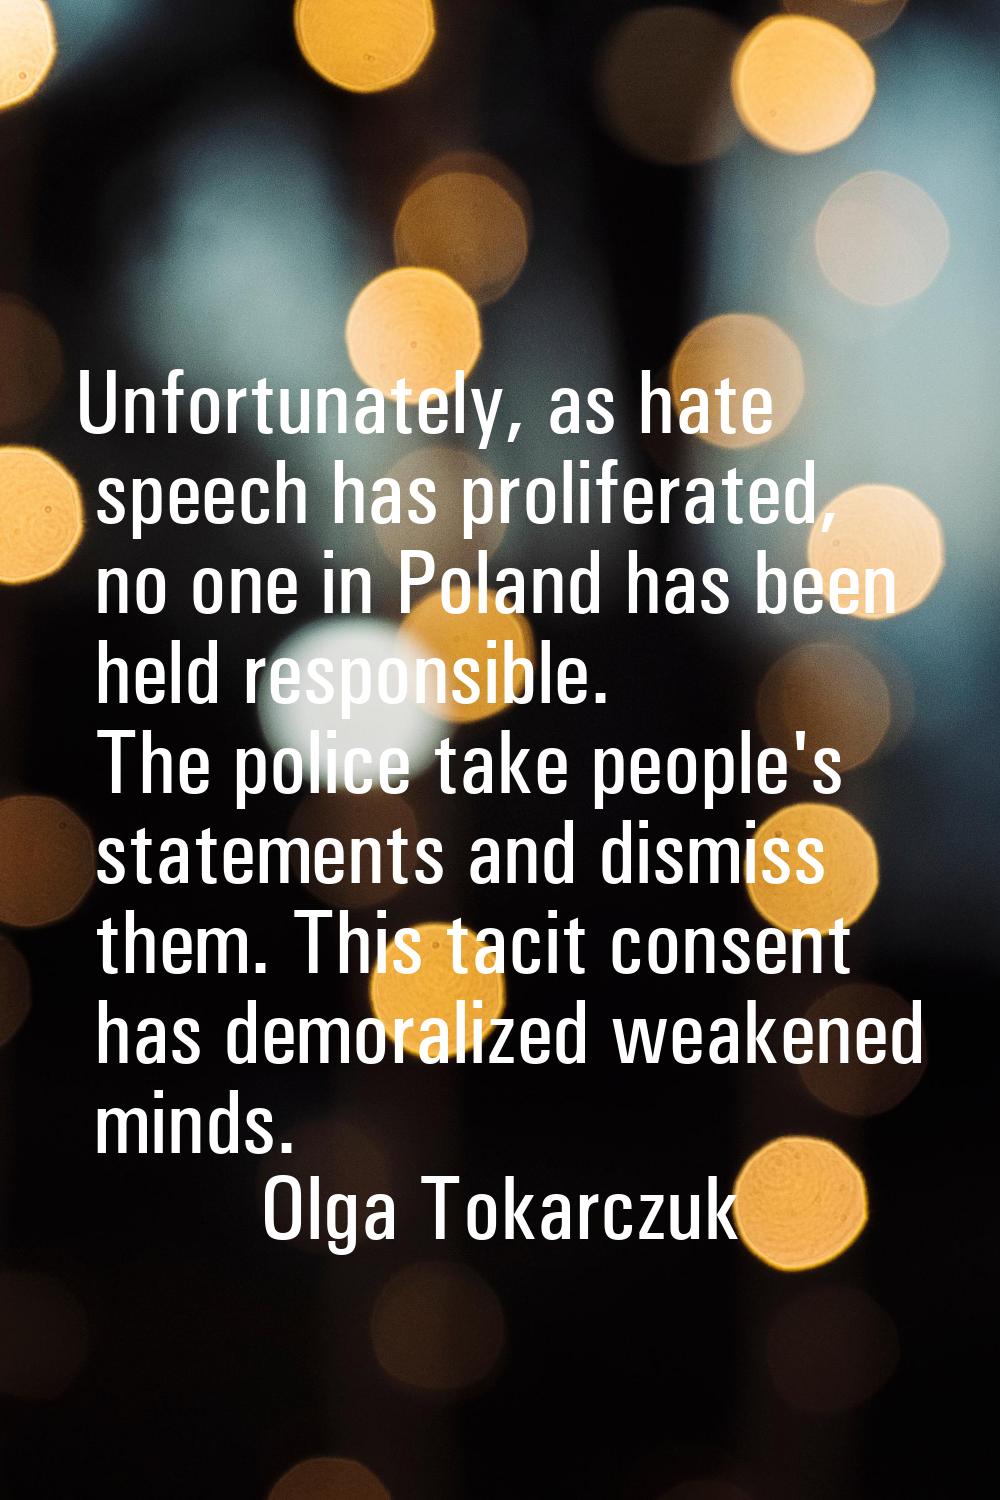 Unfortunately, as hate speech has proliferated, no one in Poland has been held responsible. The pol